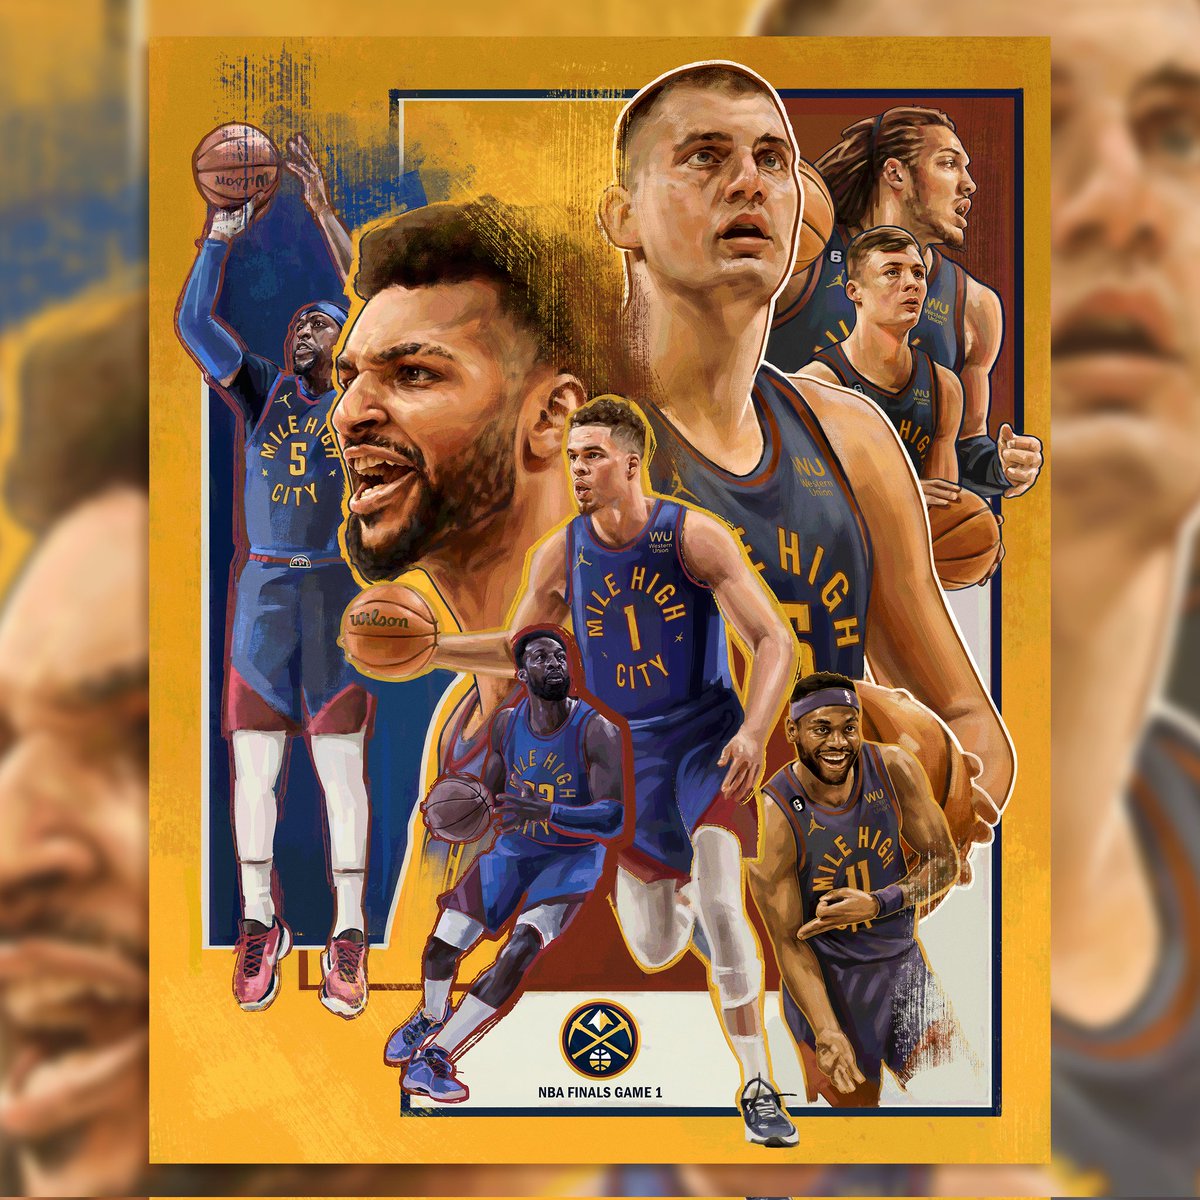 Nuggets and Knicks are off to the races! Personal and commercial work Need some alternative/illustrative content for your team? Just reach out, I can help! Rob@brunodi.com